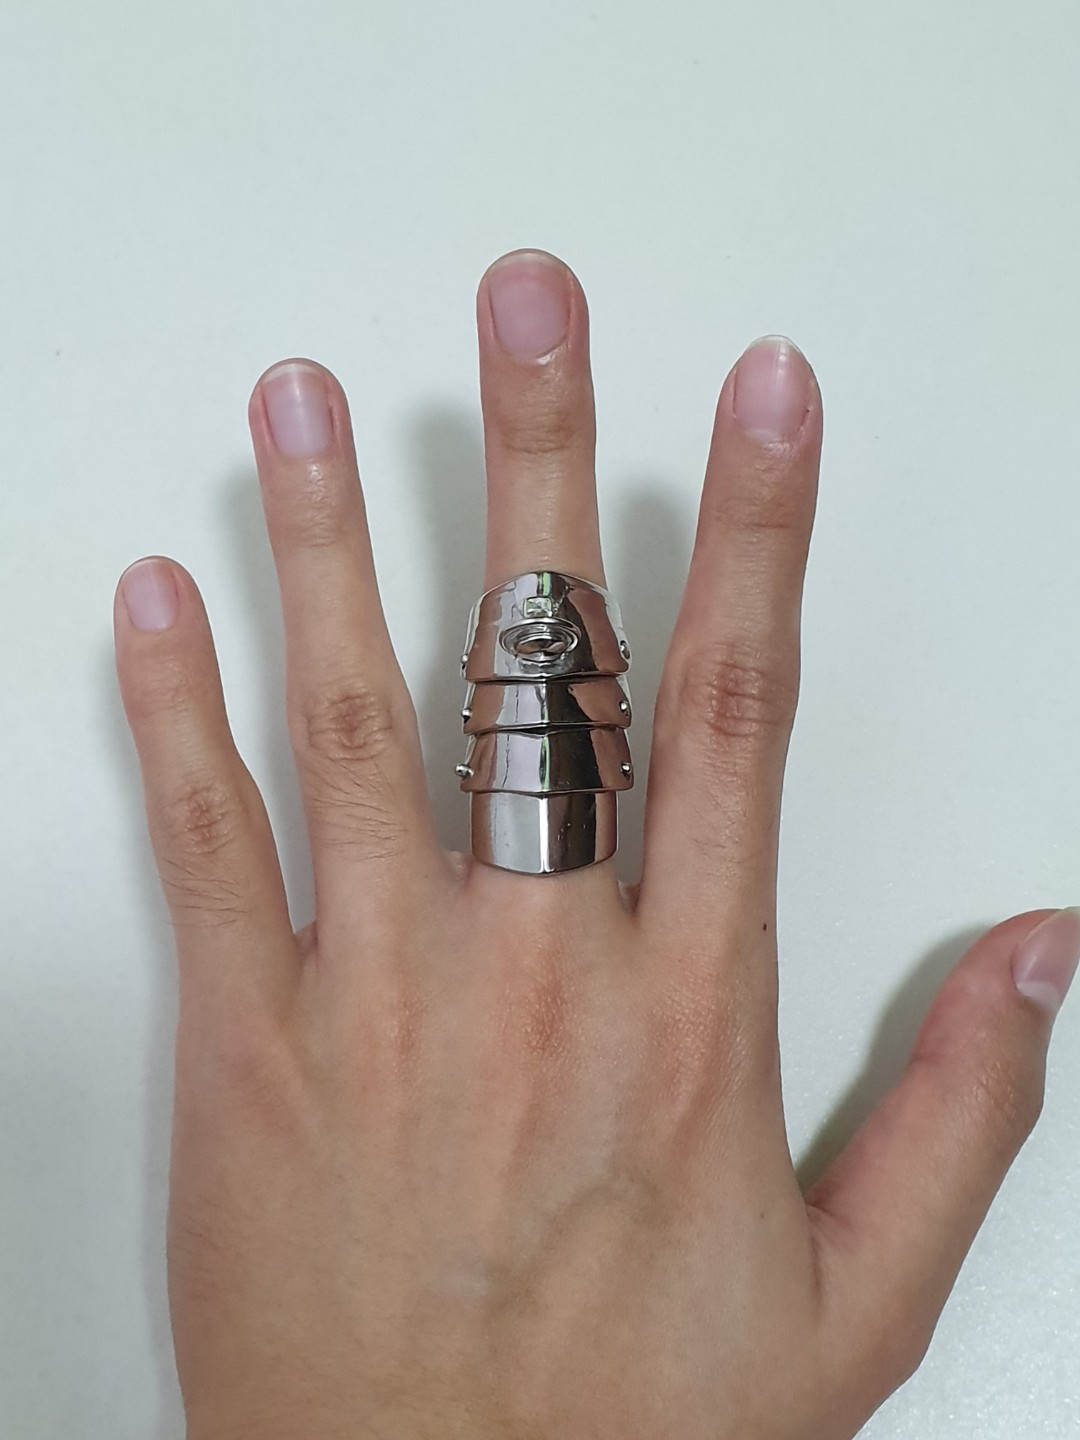 I was wondering if there are any fakes of this vivienne westwood armour ring?  And if anyone could LC This for me? Thanks : r/jewelry